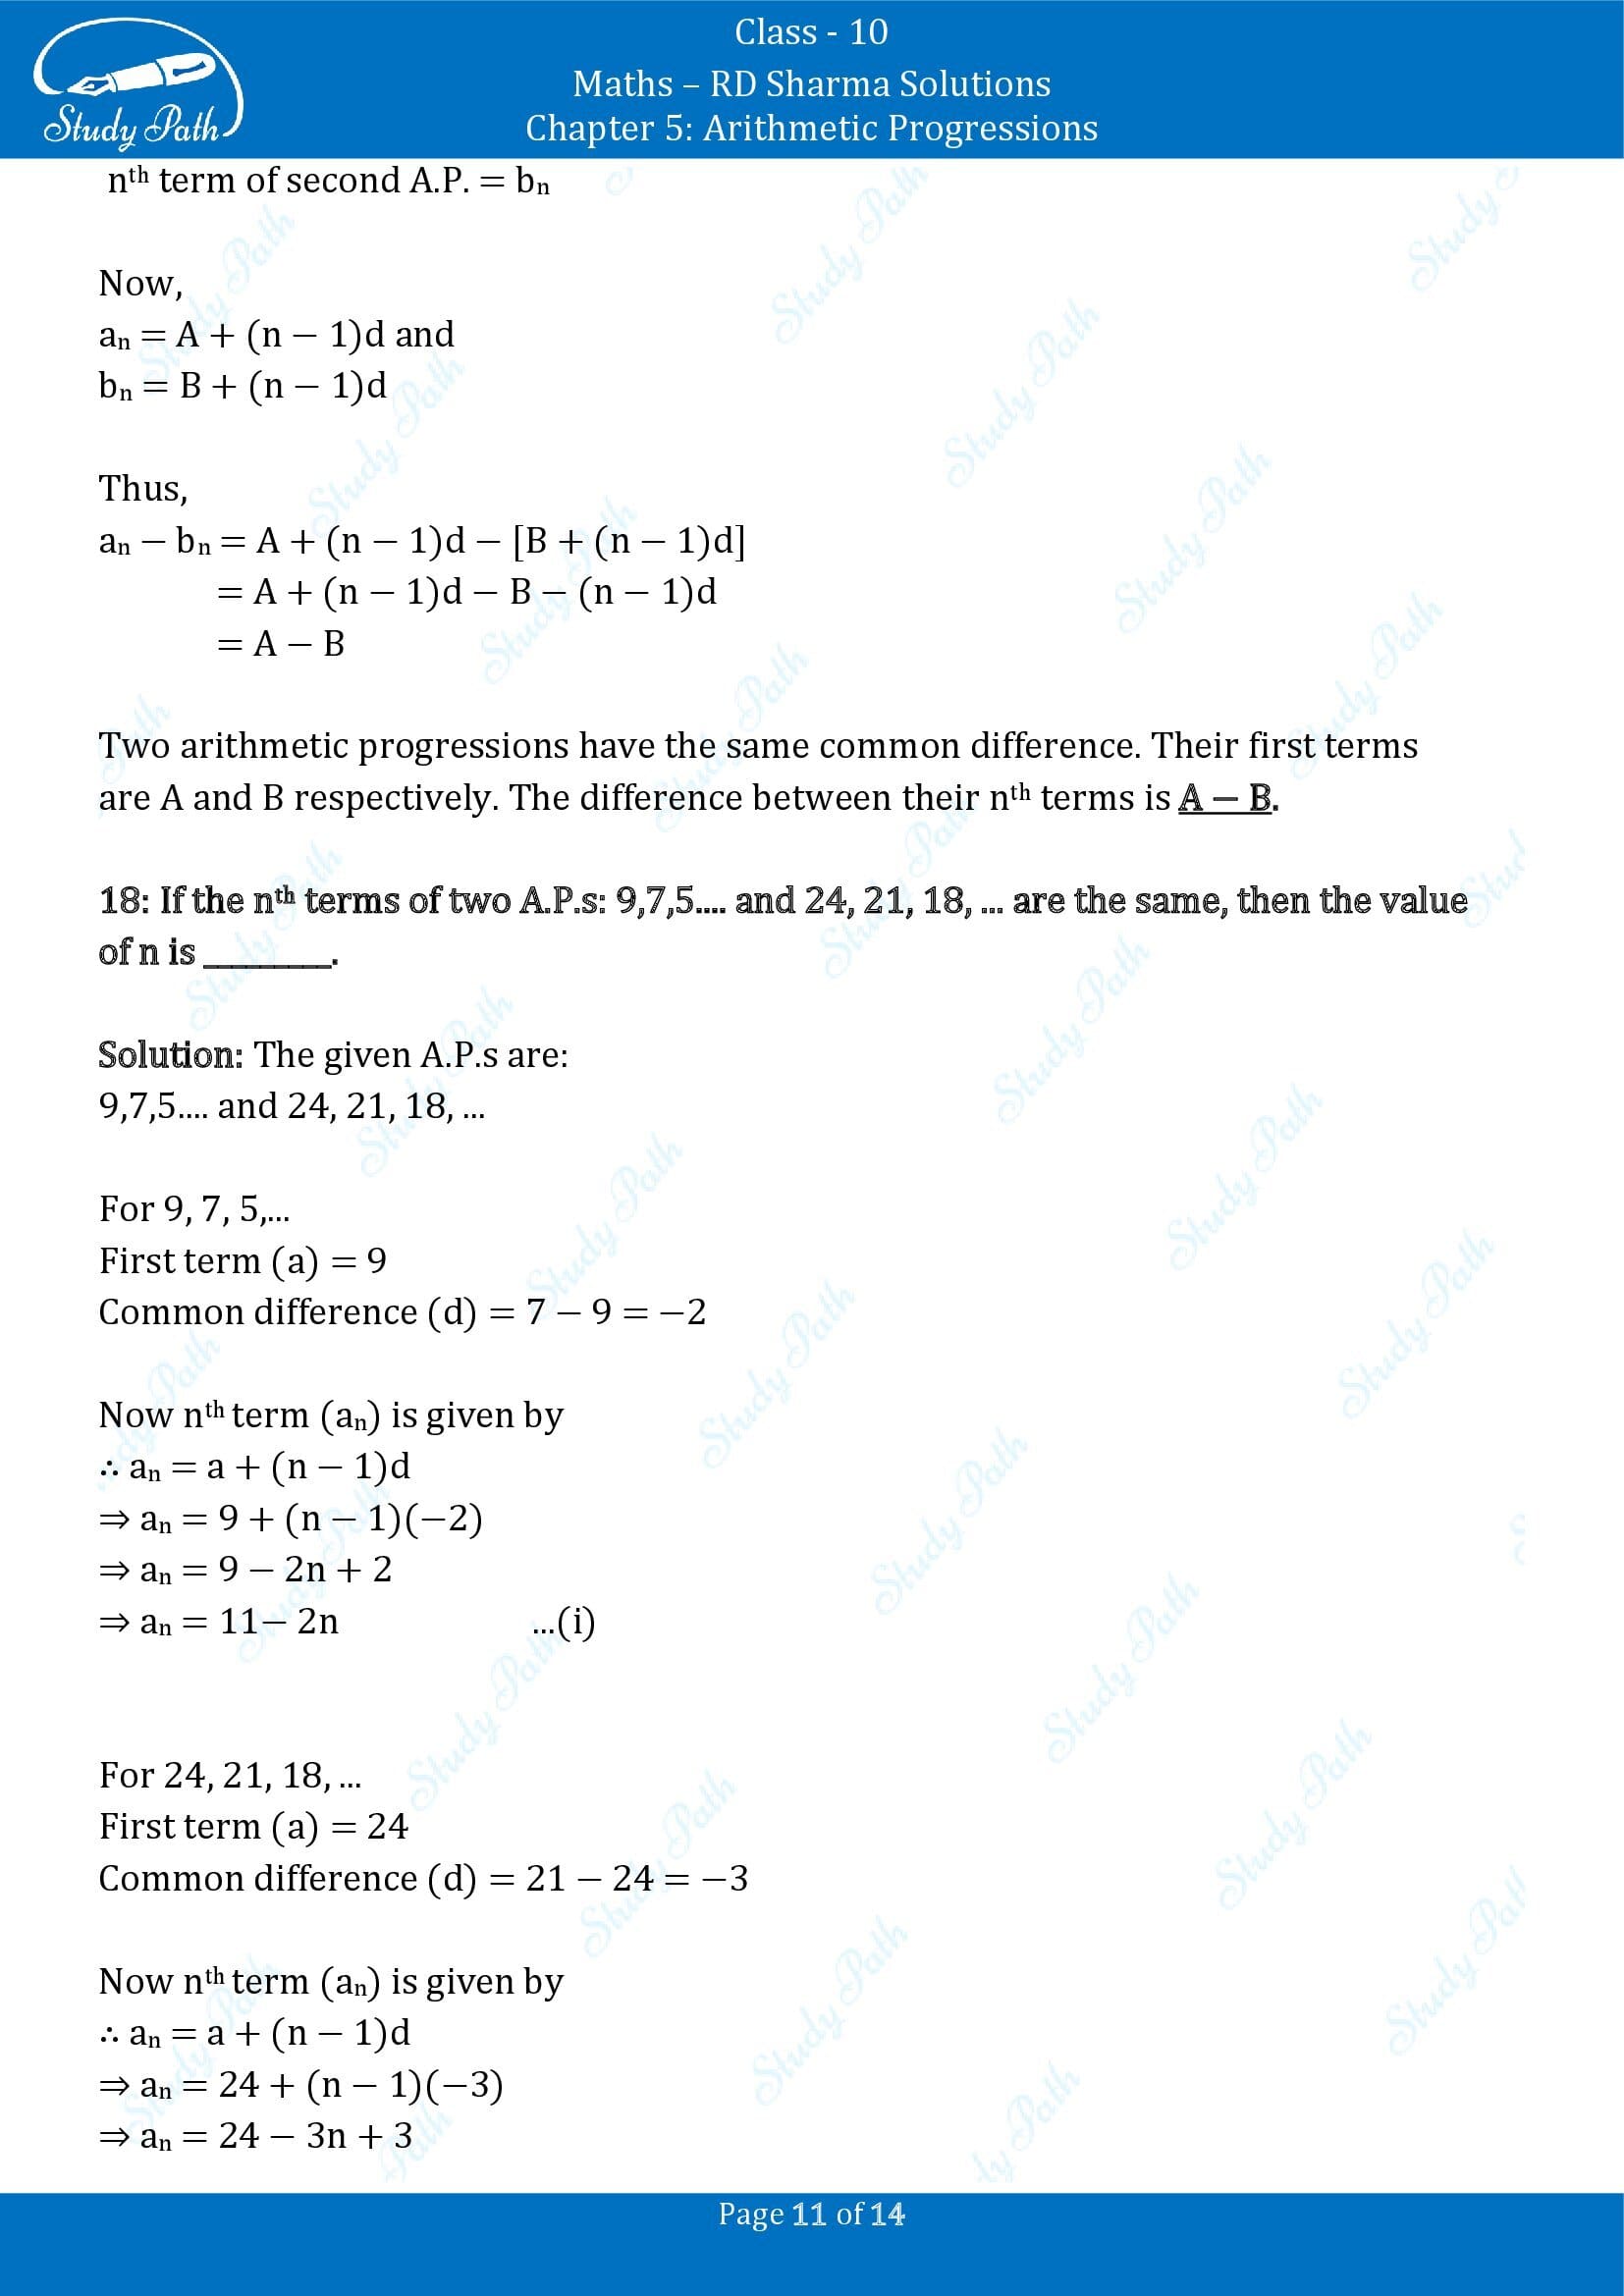 RD Sharma Solutions Class 10 Chapter 5 Arithmetic Progressions Fill in the Blank Type Questions FBQs 00011